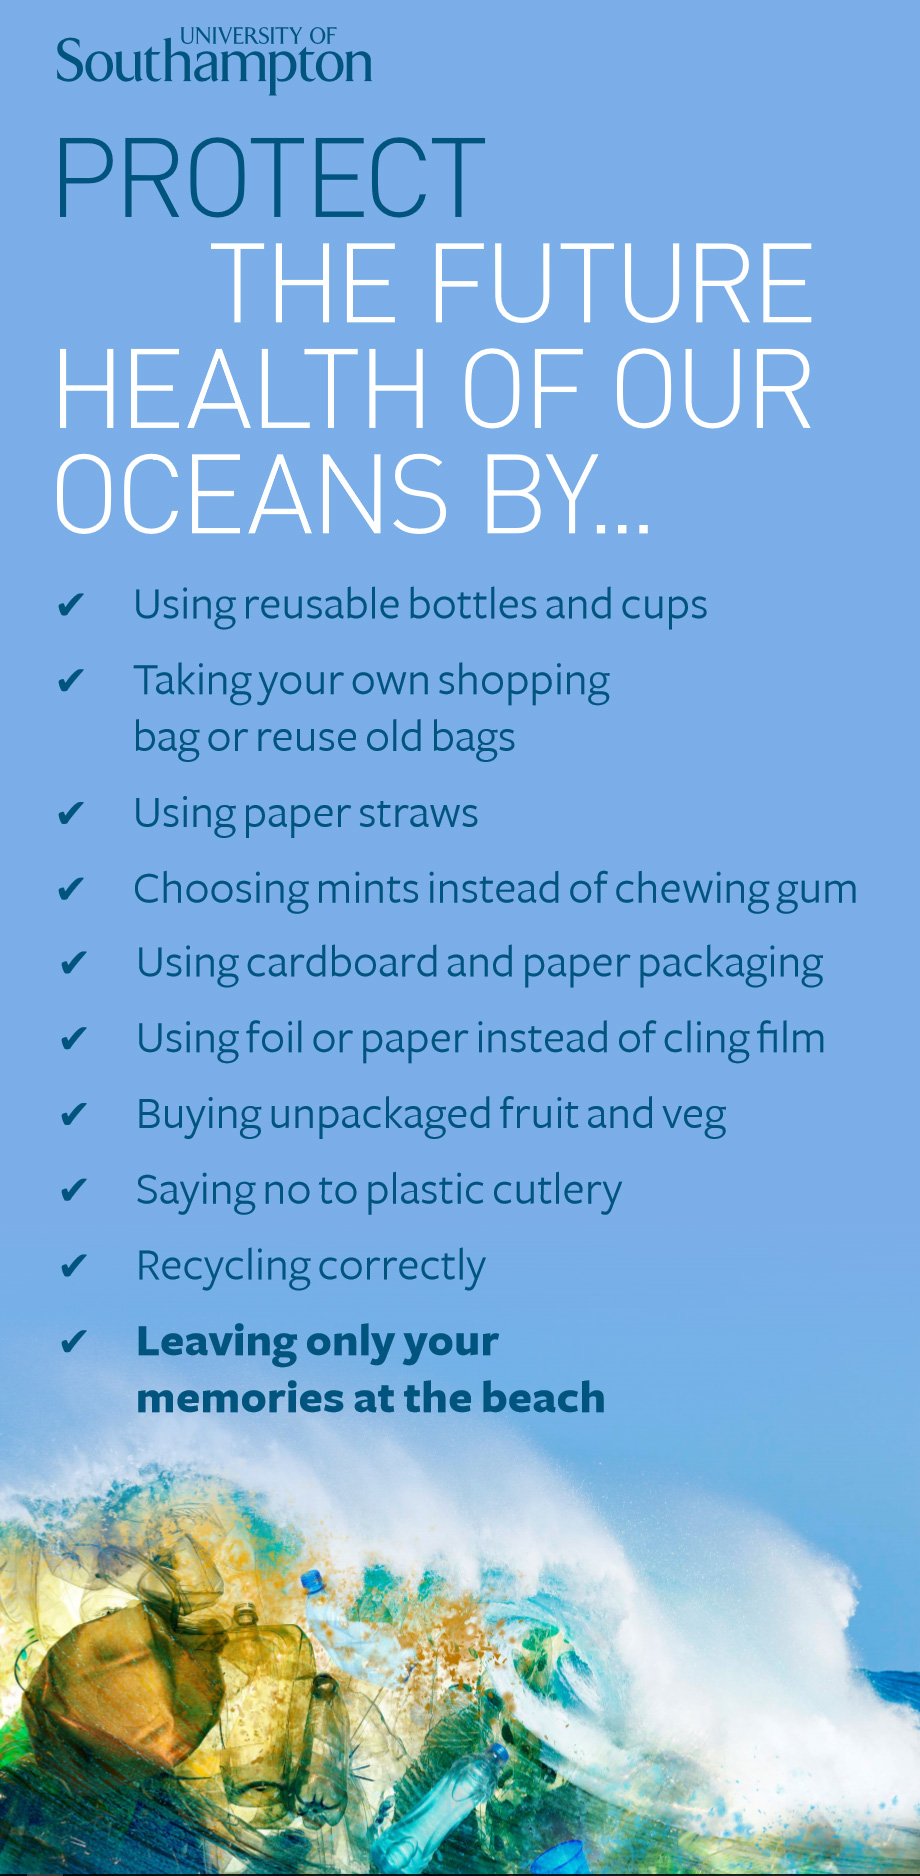 Top tips for reducing plastic waste